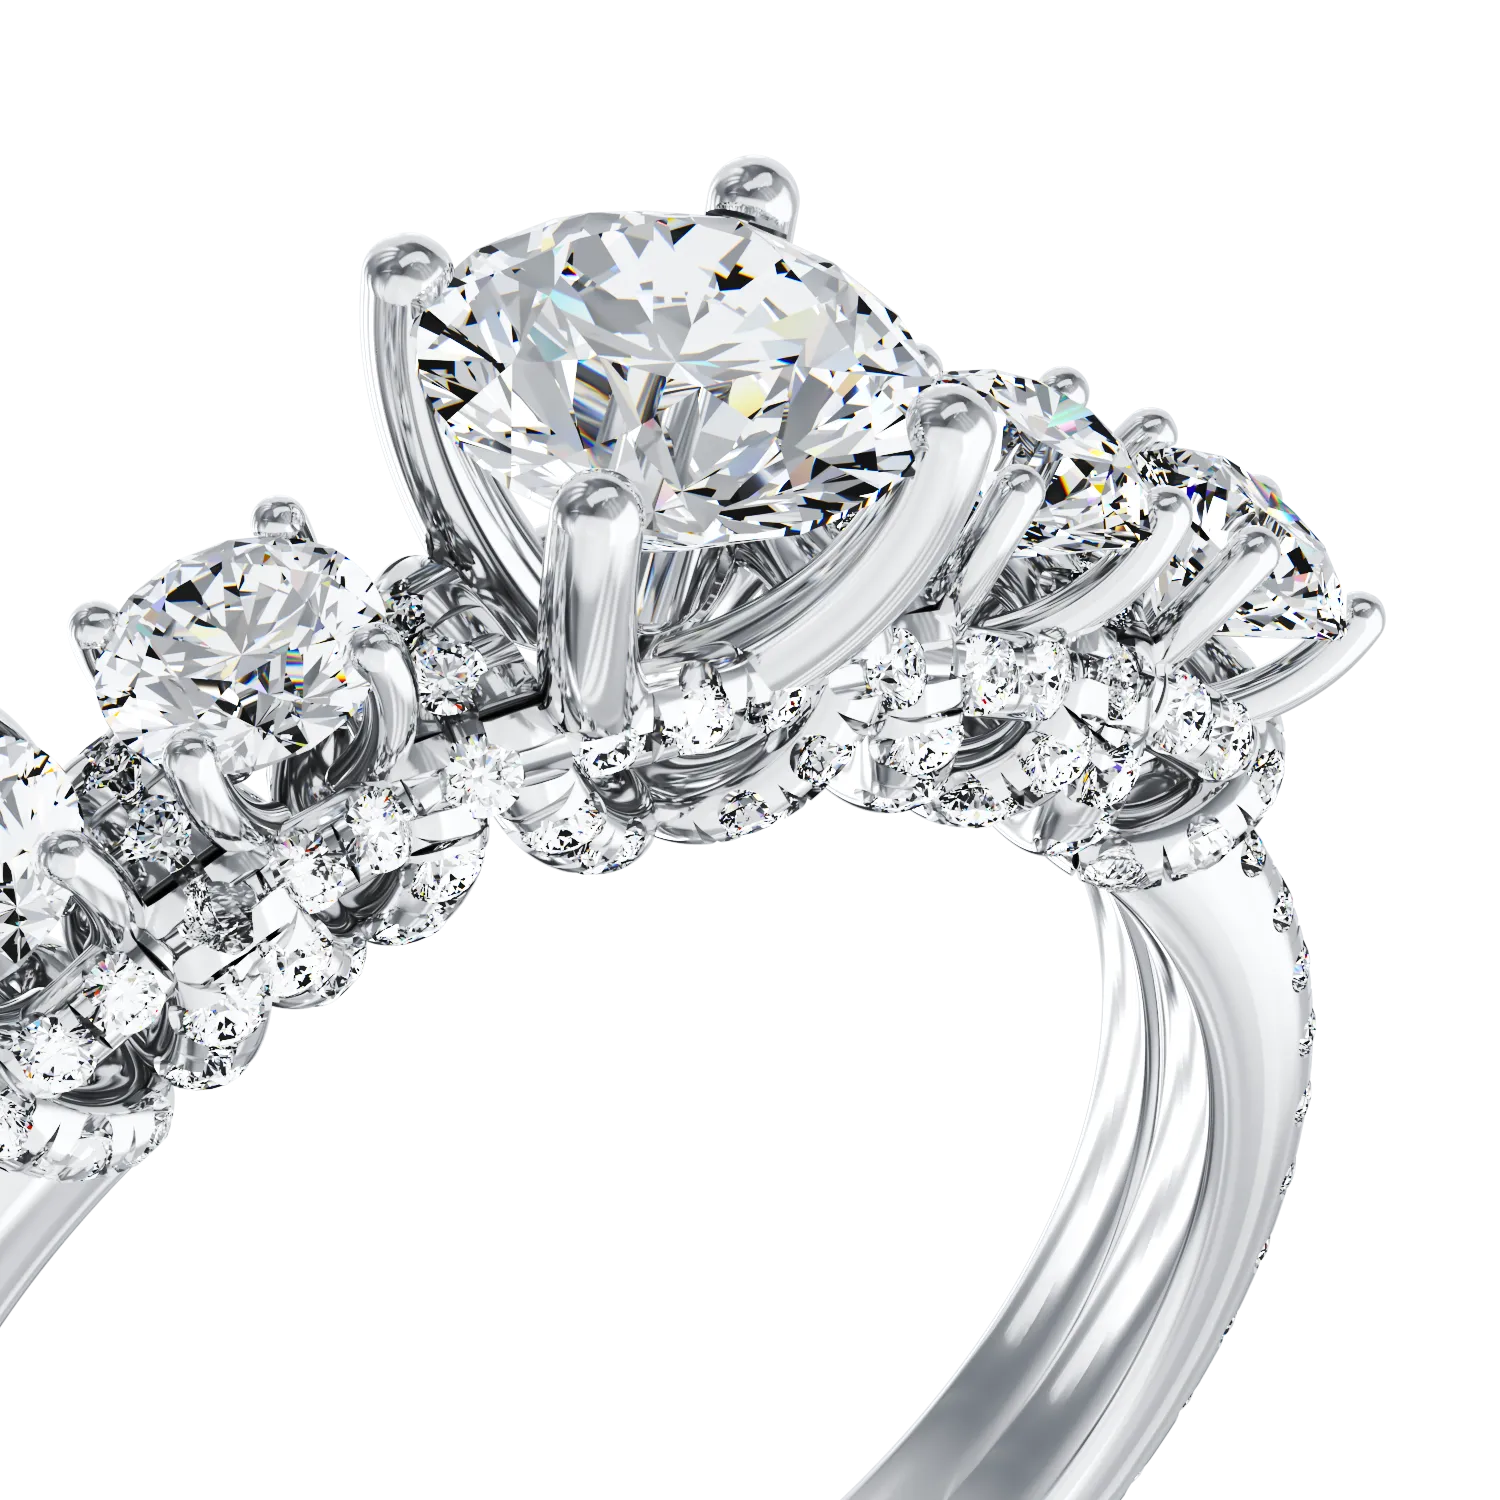 18K white gold engagement ring with 0.63ct diamond and 0.82ct diamonds